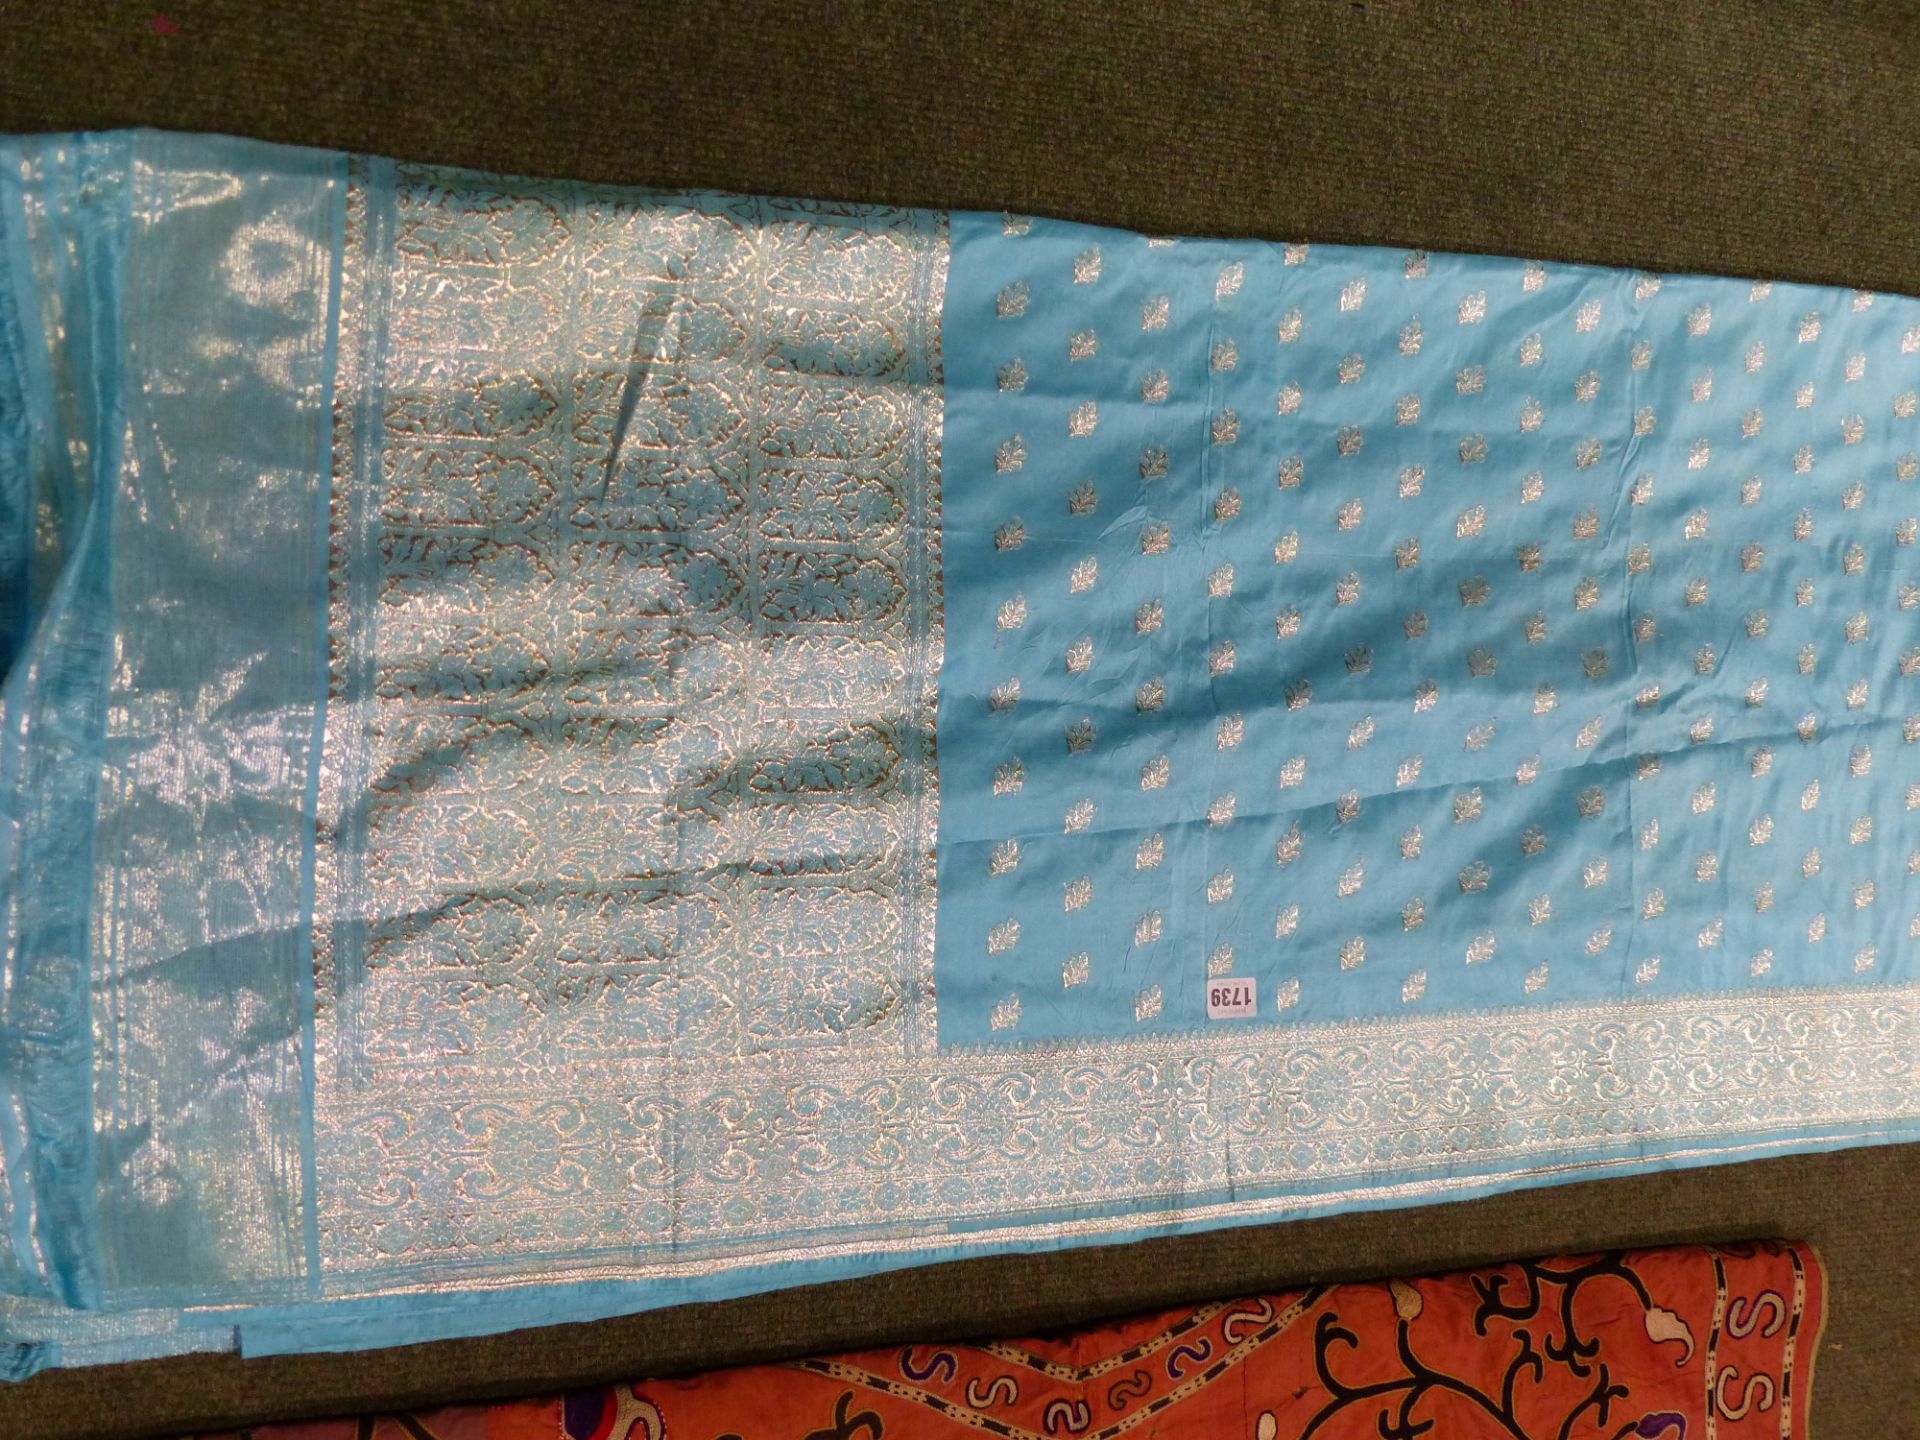 TWO EASTERN PANELS TOGETHER WITH SILK SARI - Image 2 of 14